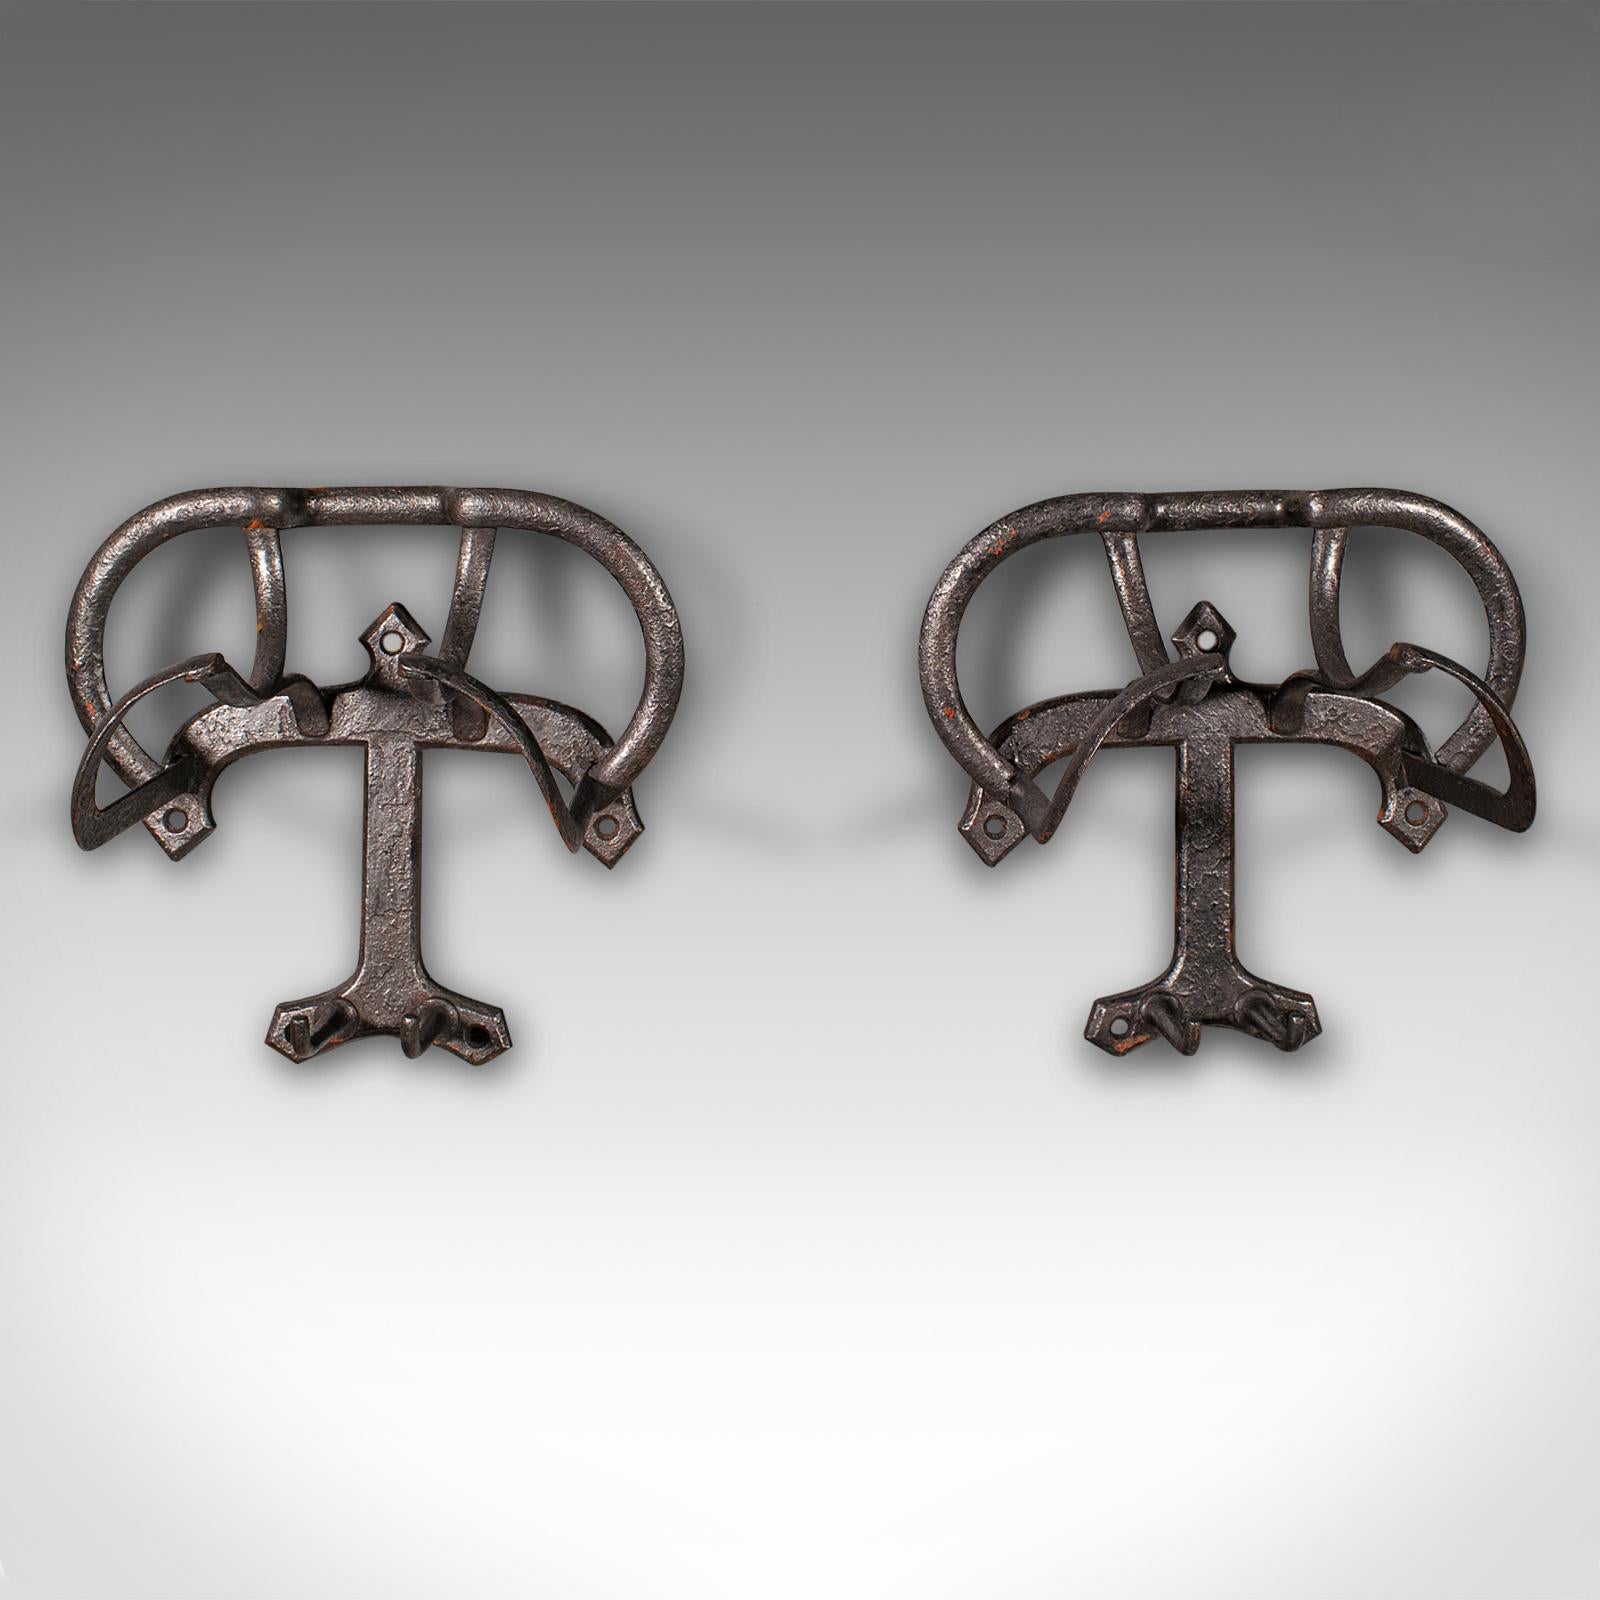 
This is a pair of antique saddle racks. An English, cast iron stable or outdoor equestrian tack rest, dating to the late Victorian period, circa 1900.

Traditional saddle racks with an appealing weathered finish
Displaying a desirable aged patina